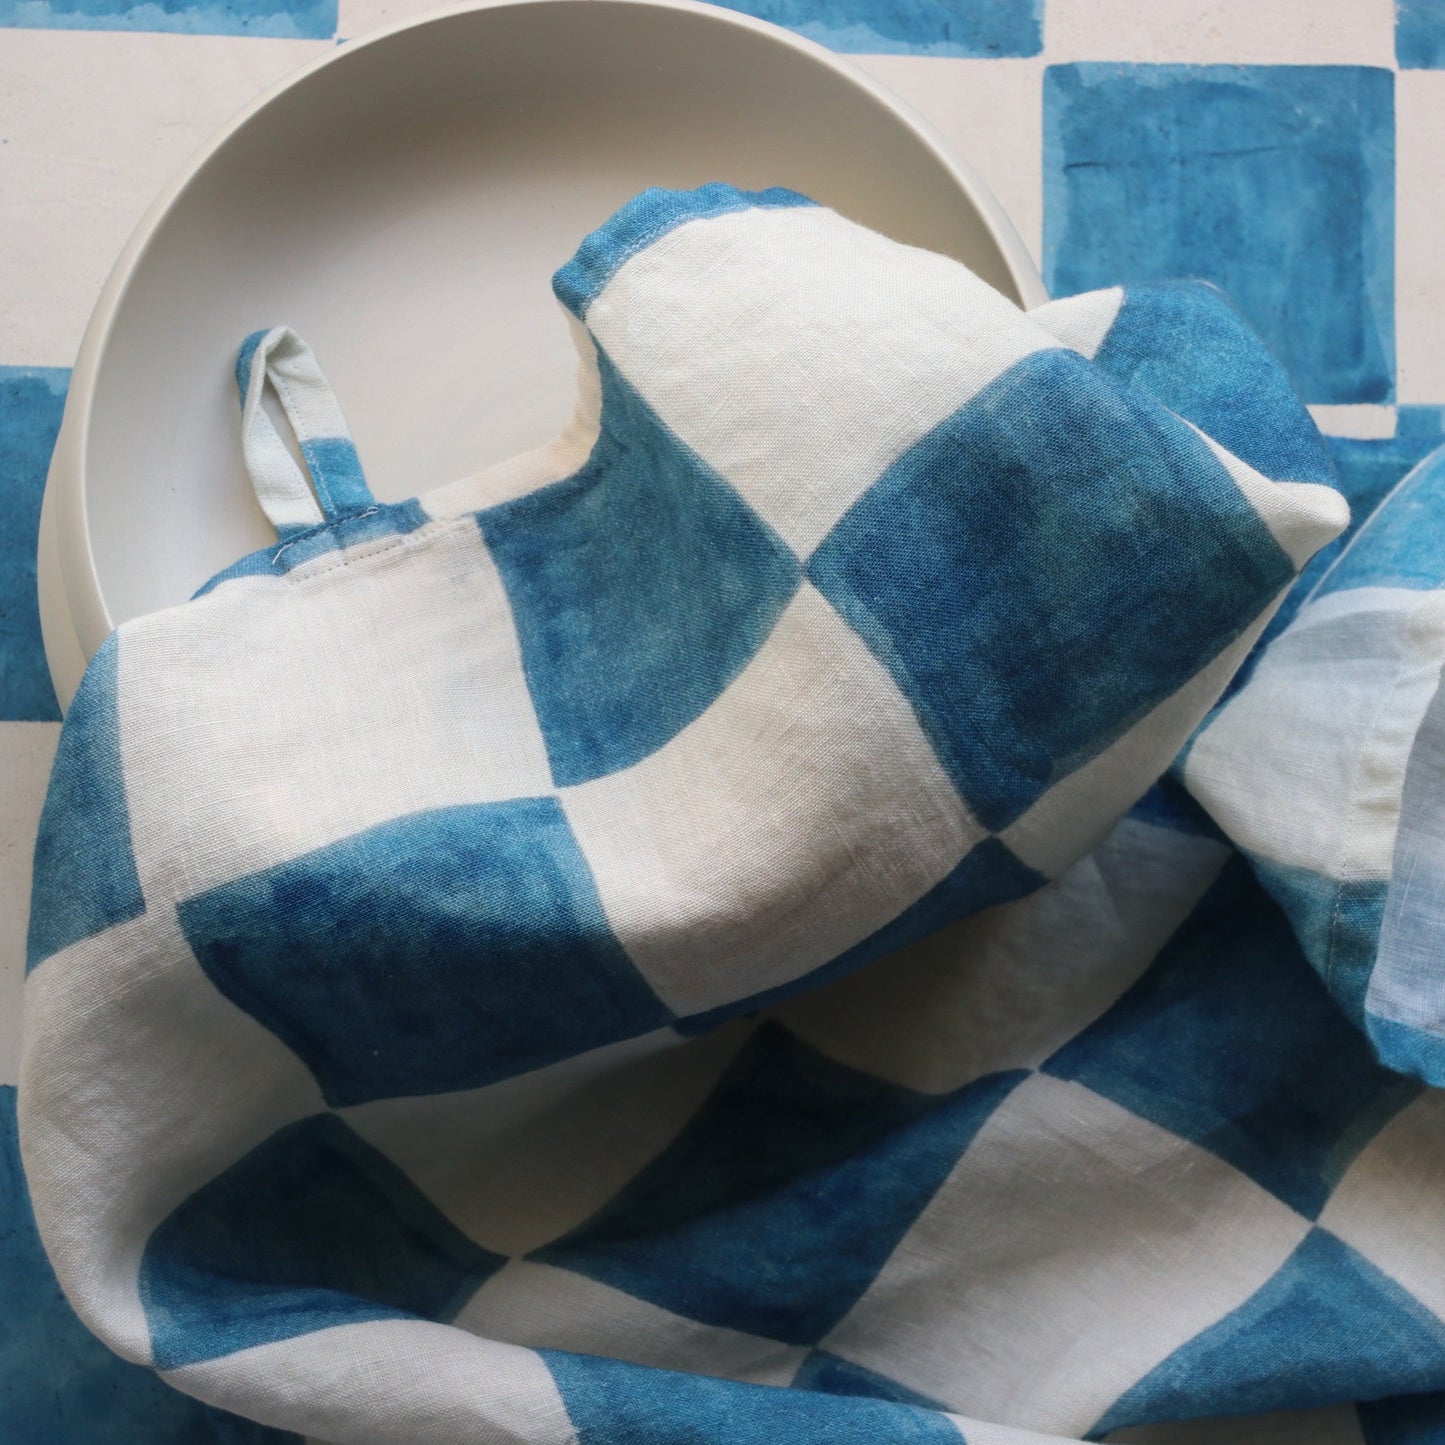 special edition - dishcloth with chess printed pattern